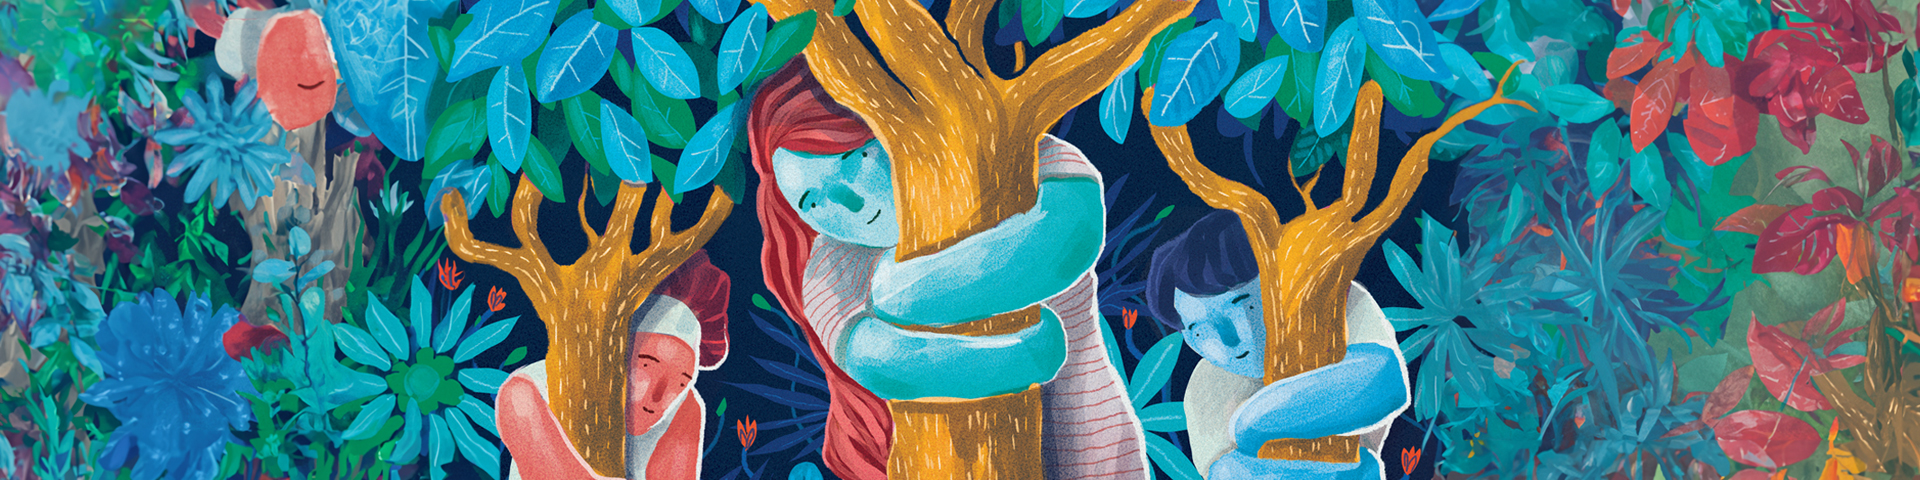 Colourful illustration of three figures embracing trees.